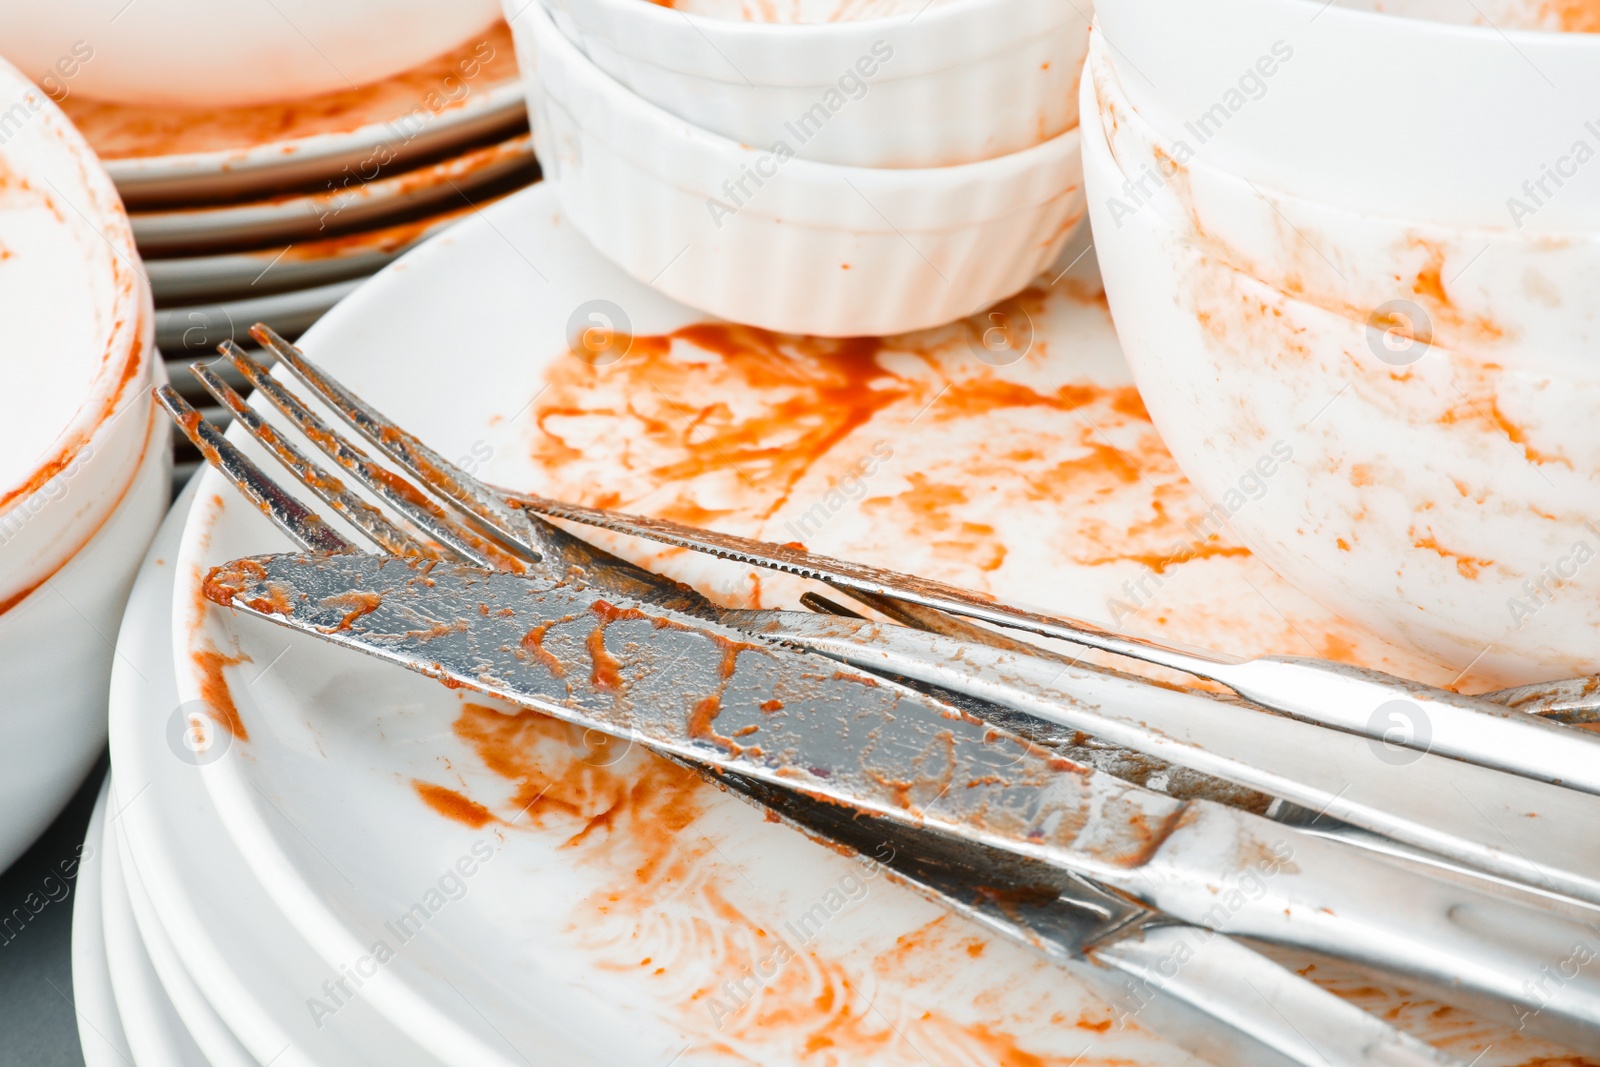 Photo of Stack of dirty dishes with cutlery, closeup